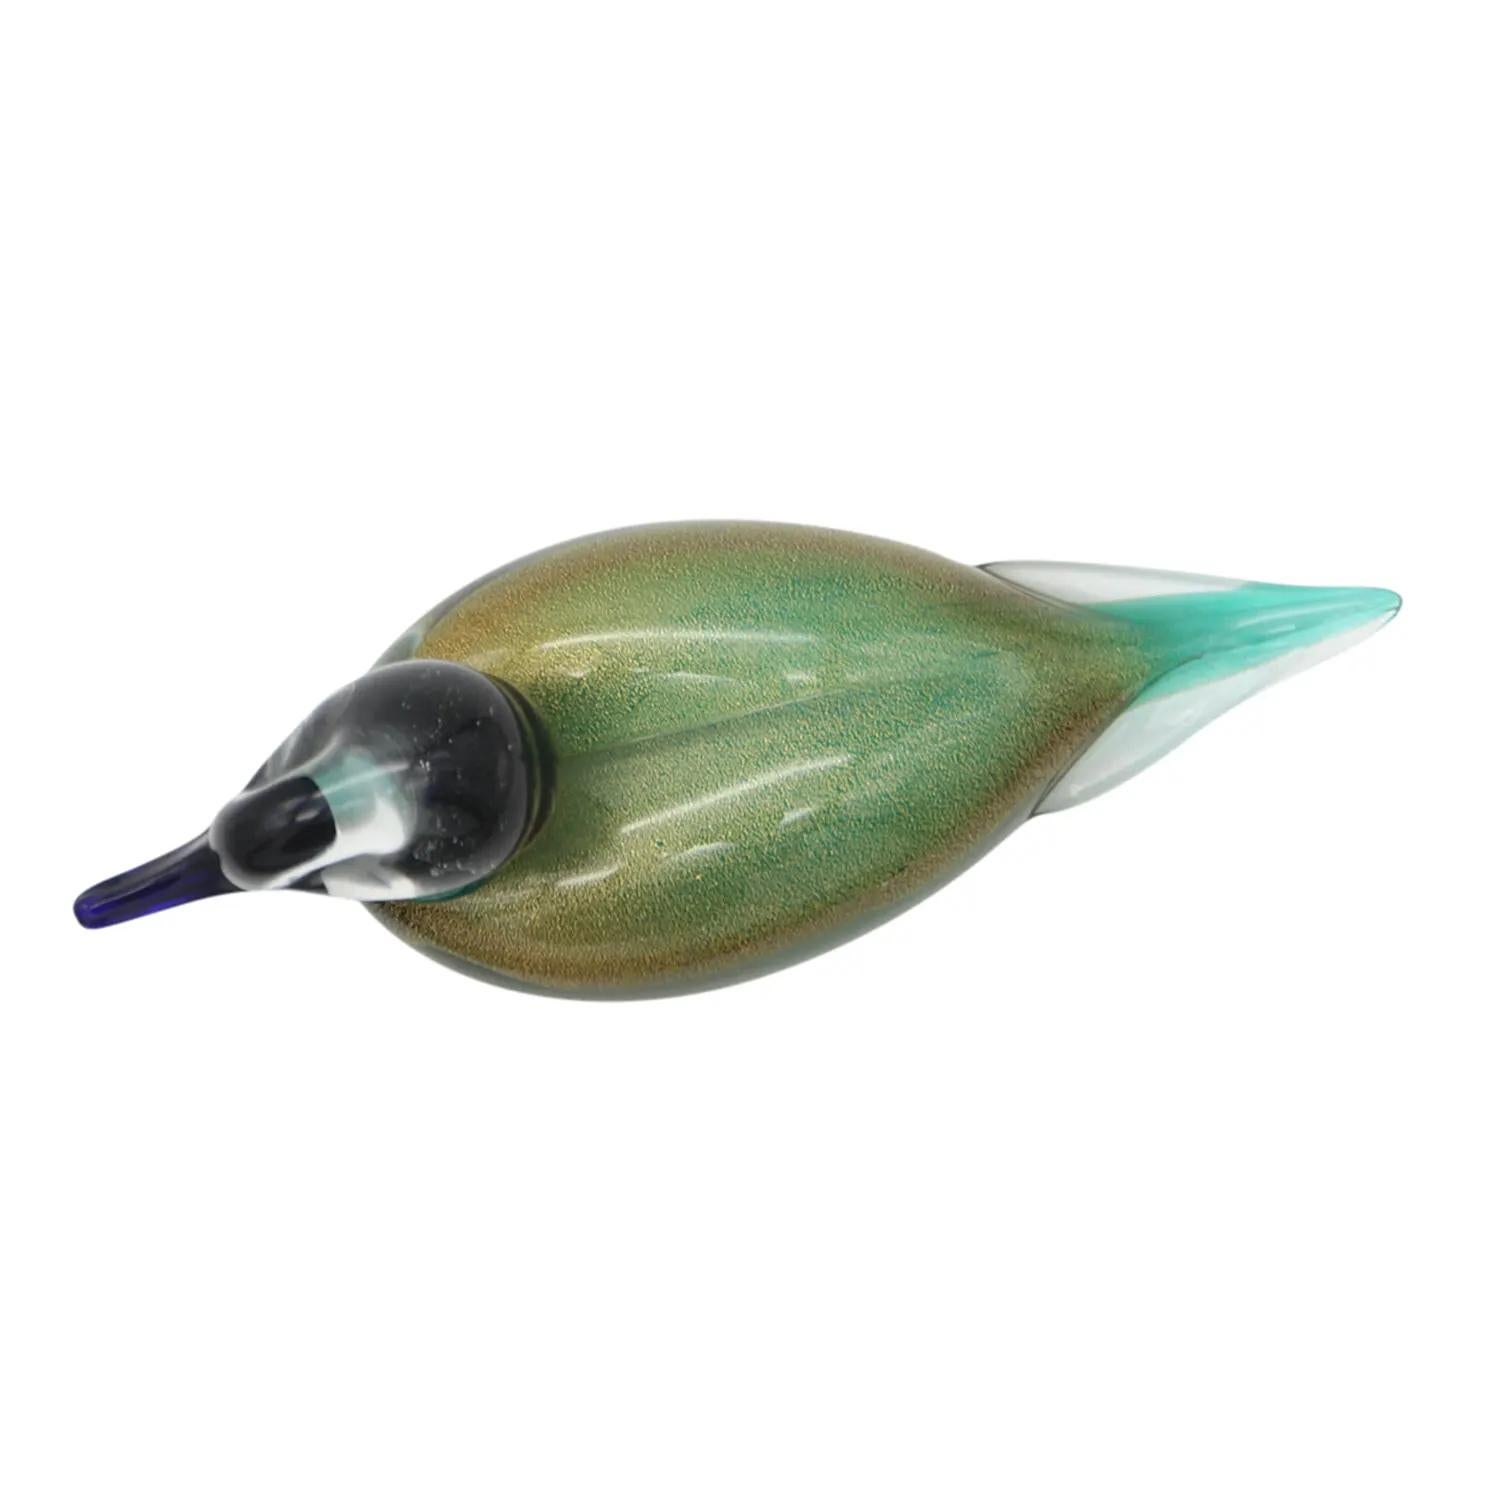 A bilious green, vintage Mid-Century Modern Italian duck made of hand blown colored Murano glass, designed, produced by Paolo Venini and Toni Zuccheri in good condition. The beak and neck of the table, room décor piece is made of black glass,